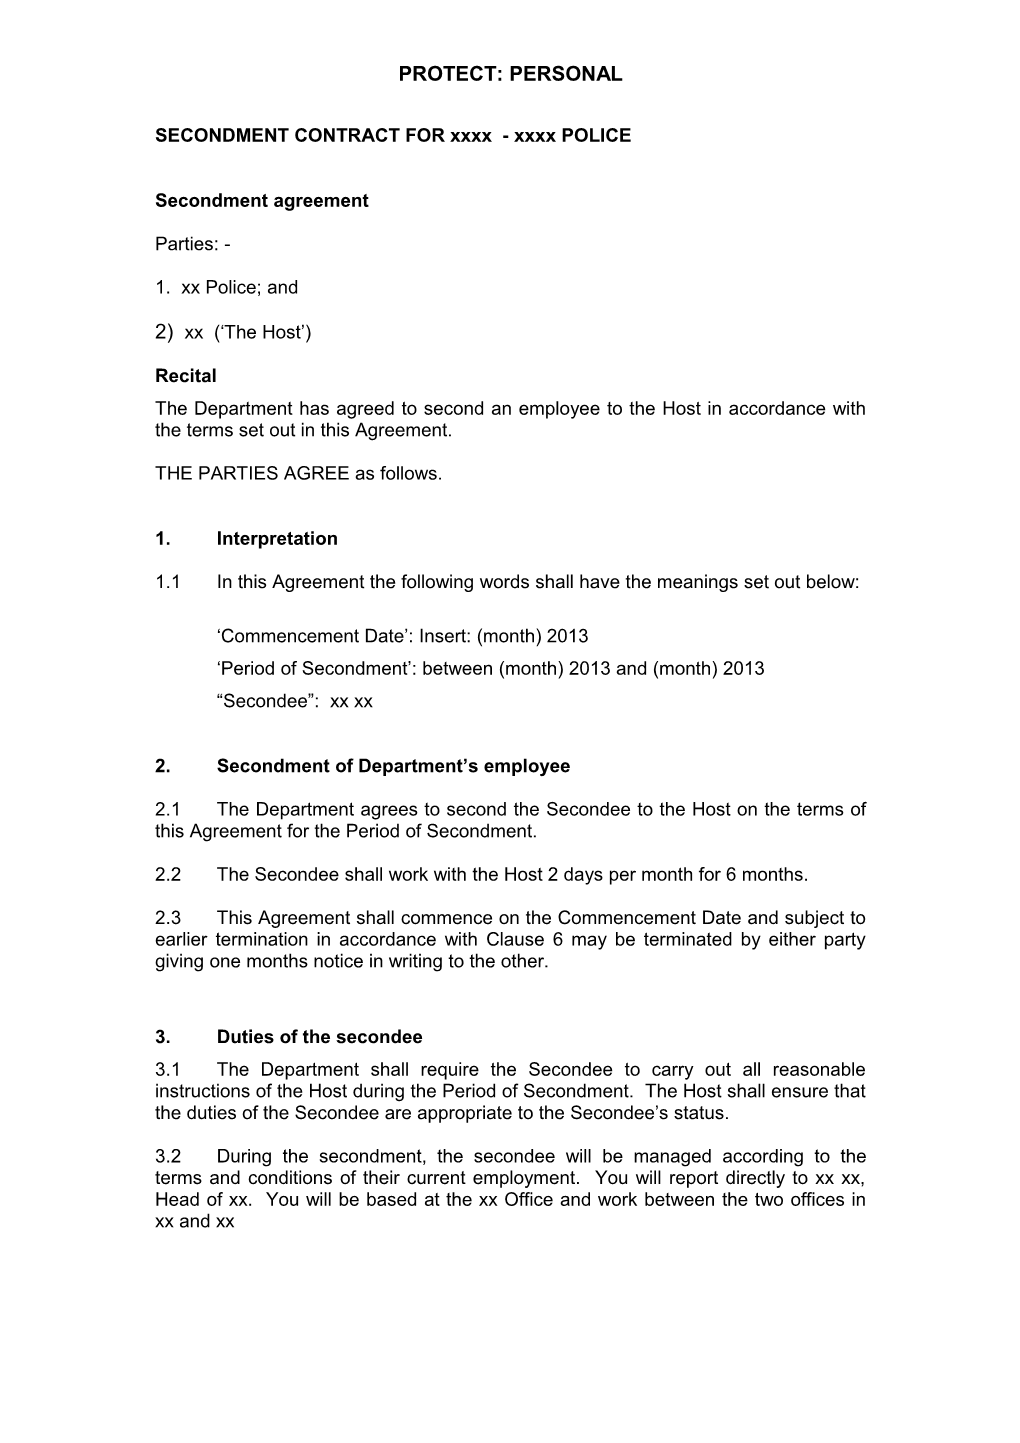 Secondment Contract for Andy John